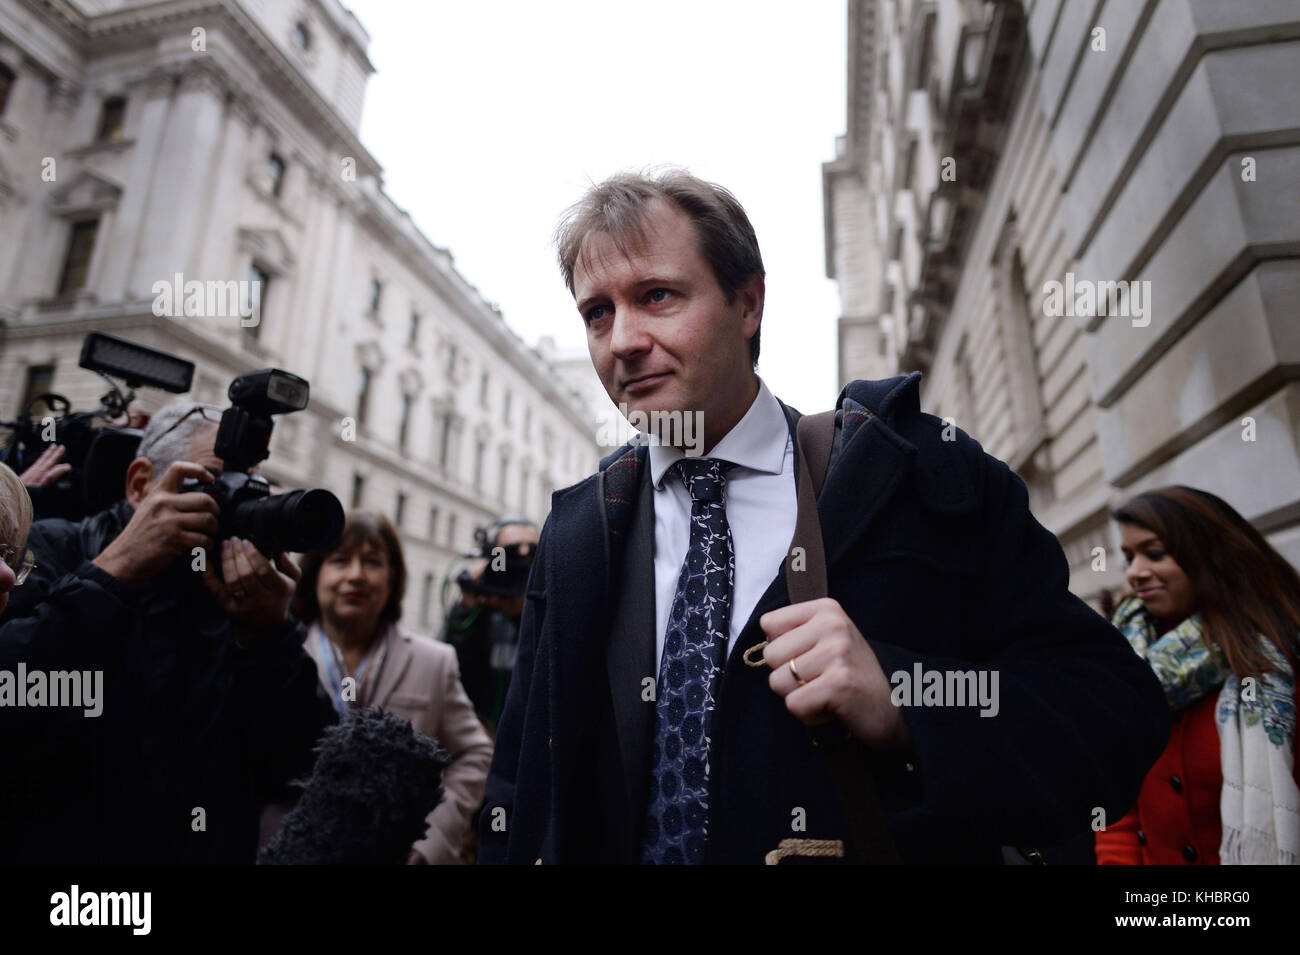 Richard Ratcliffe, the husband of Nazanin Zaghari Ratcliffe, who is being detained in Iran, leaves after a meeting with Foreign Secretary Boris Johnson at the Foreign & Commonwealth Office in London. Stock Photo